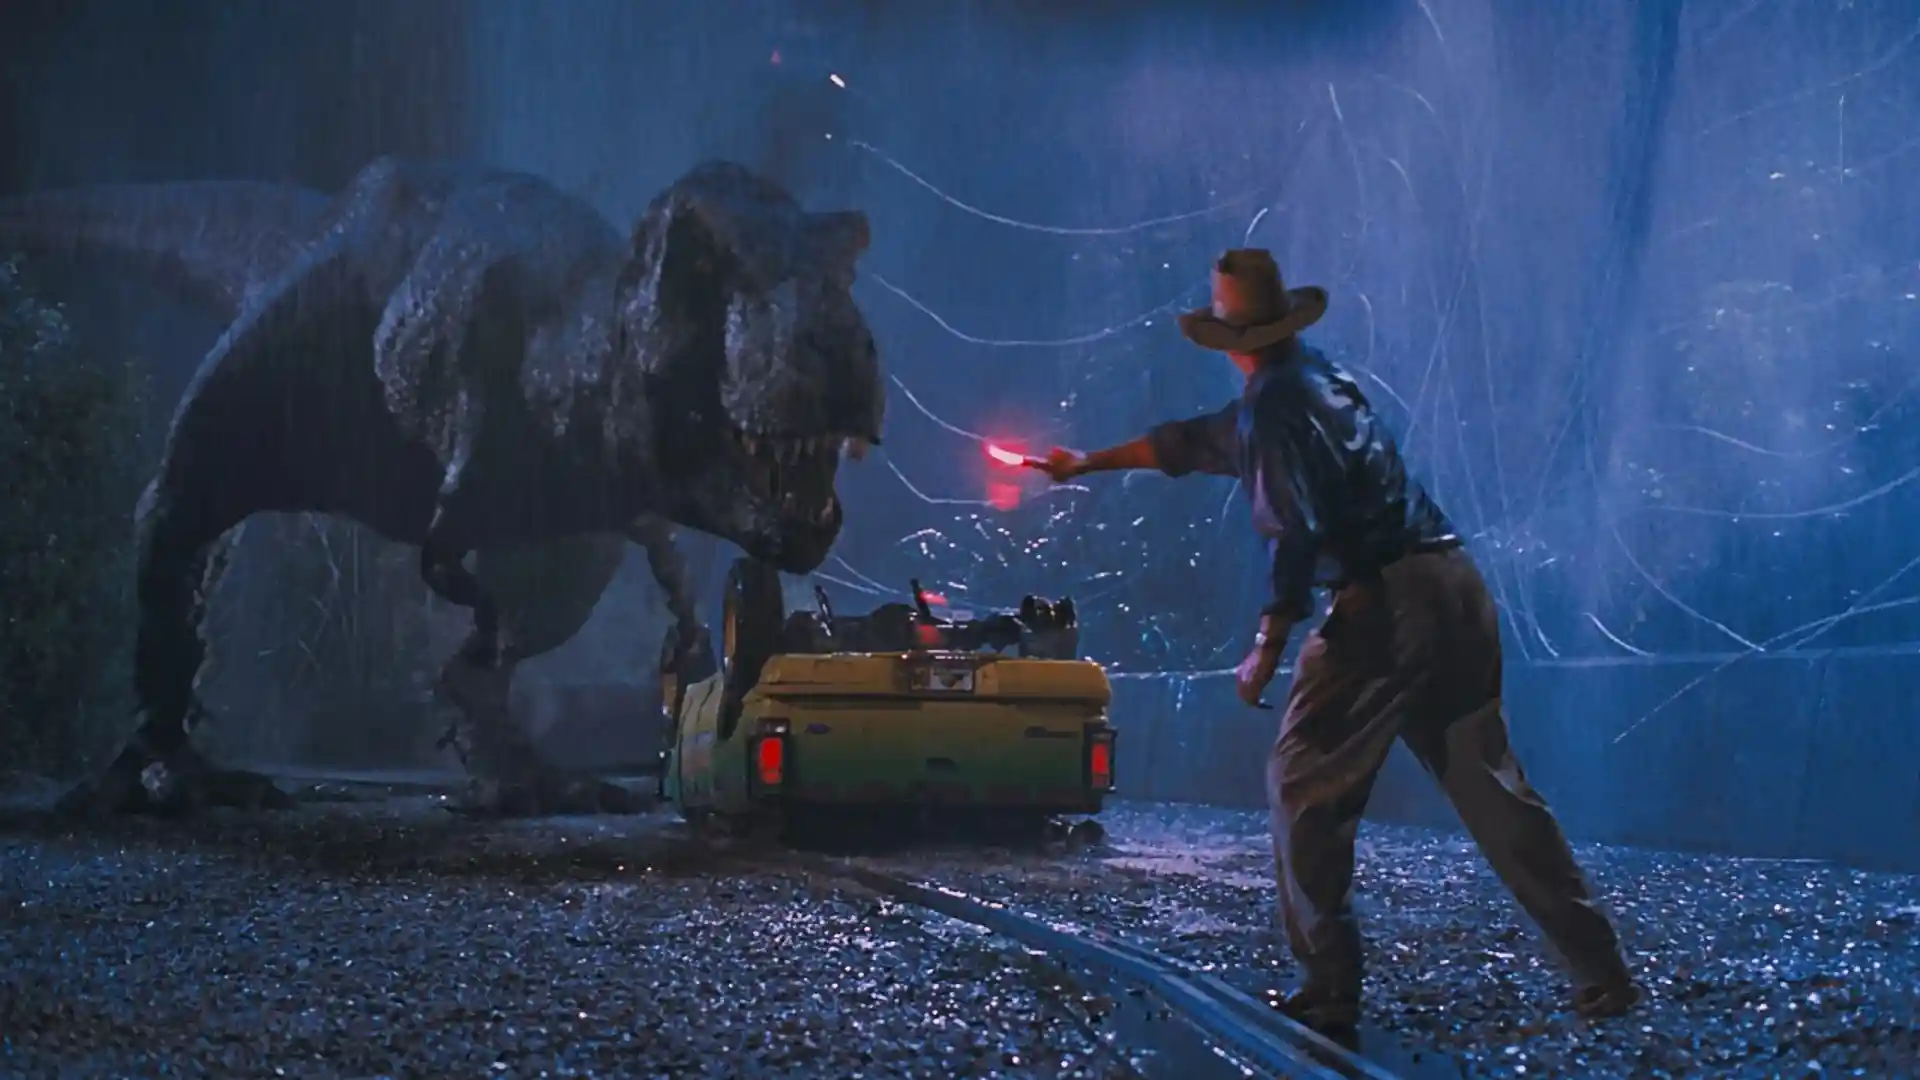 The best Jurassic Park and Jurassic World movies to watch